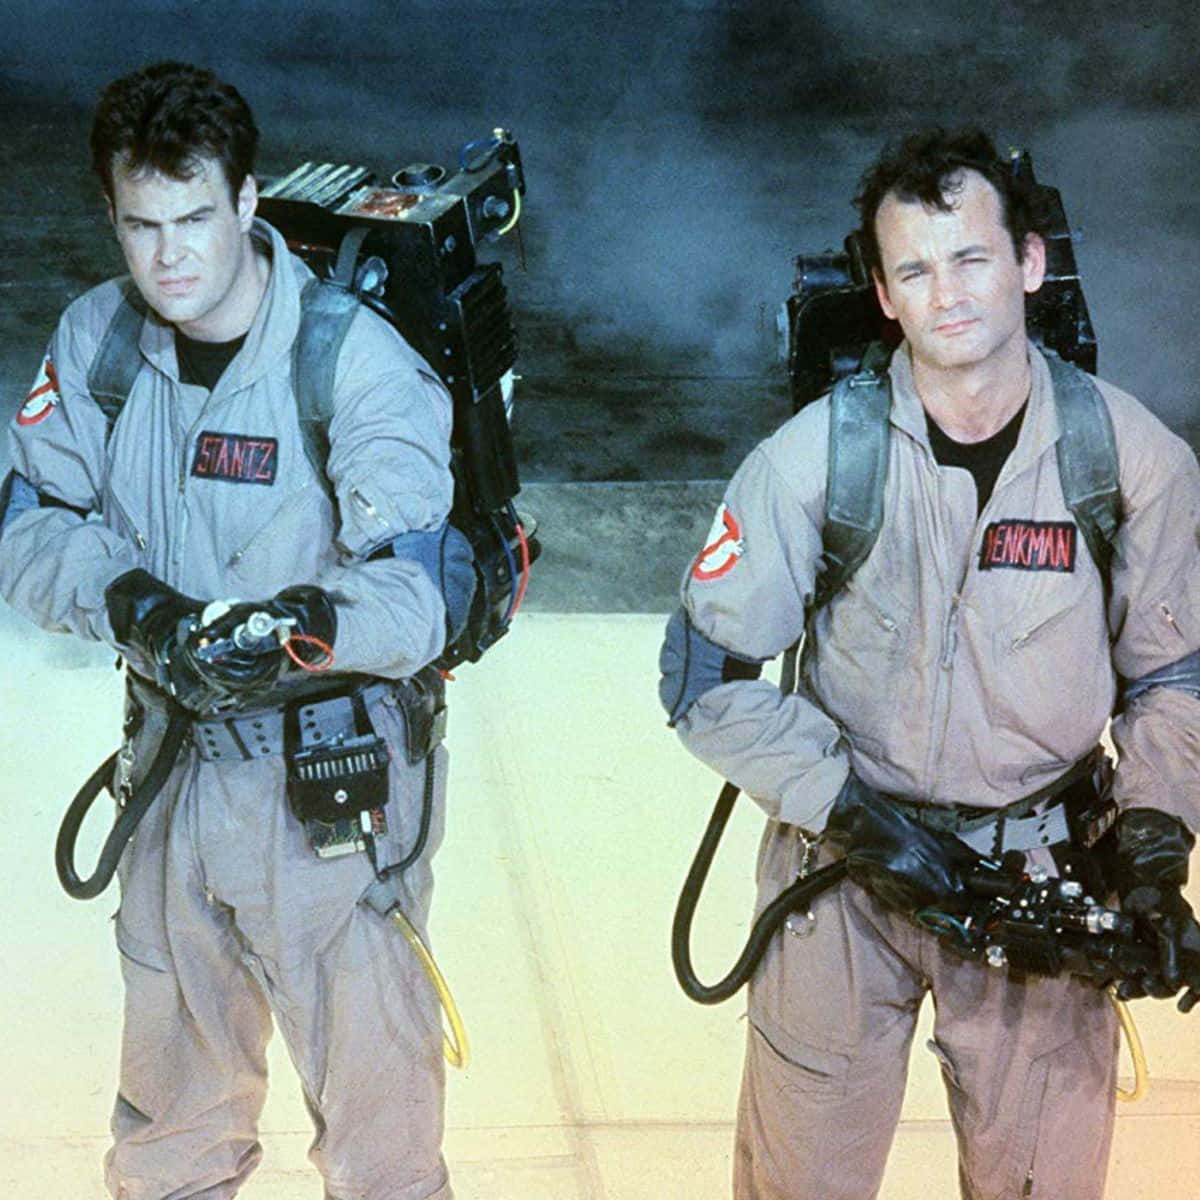 The Iconic Ghostbusters Team in Action